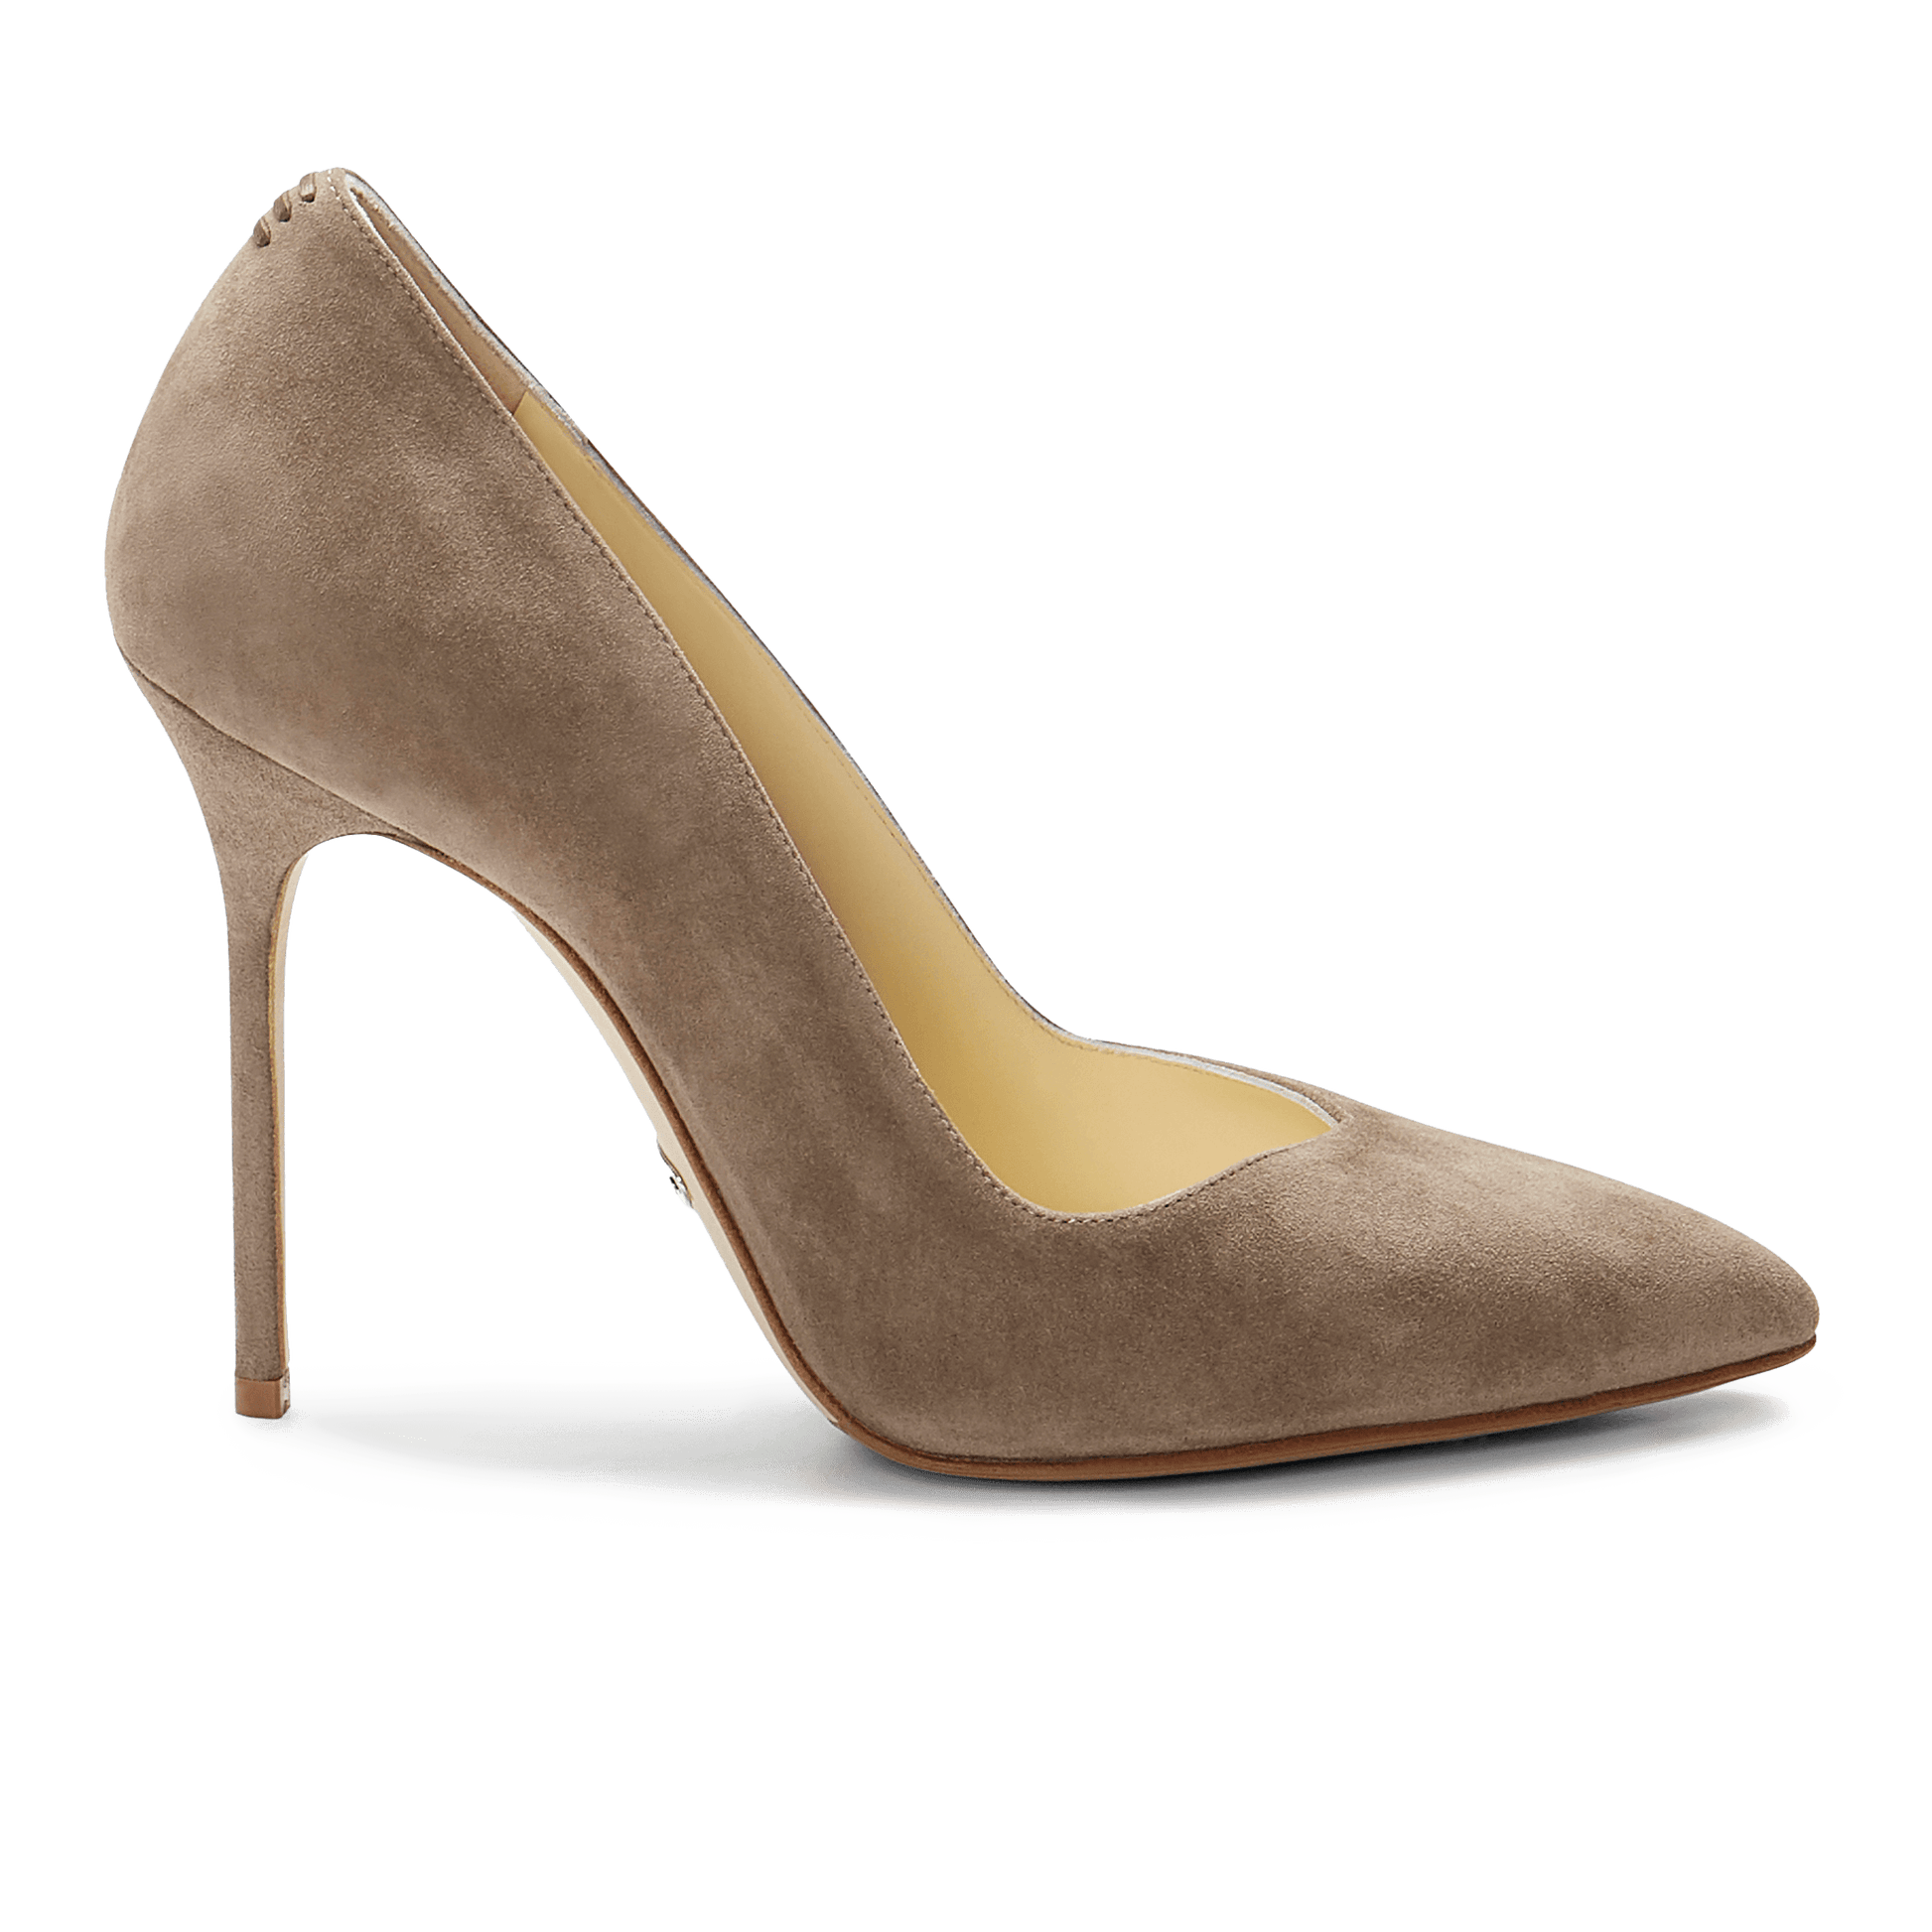 100m Italian Made Pointed Toe Pump in Taupe Suede